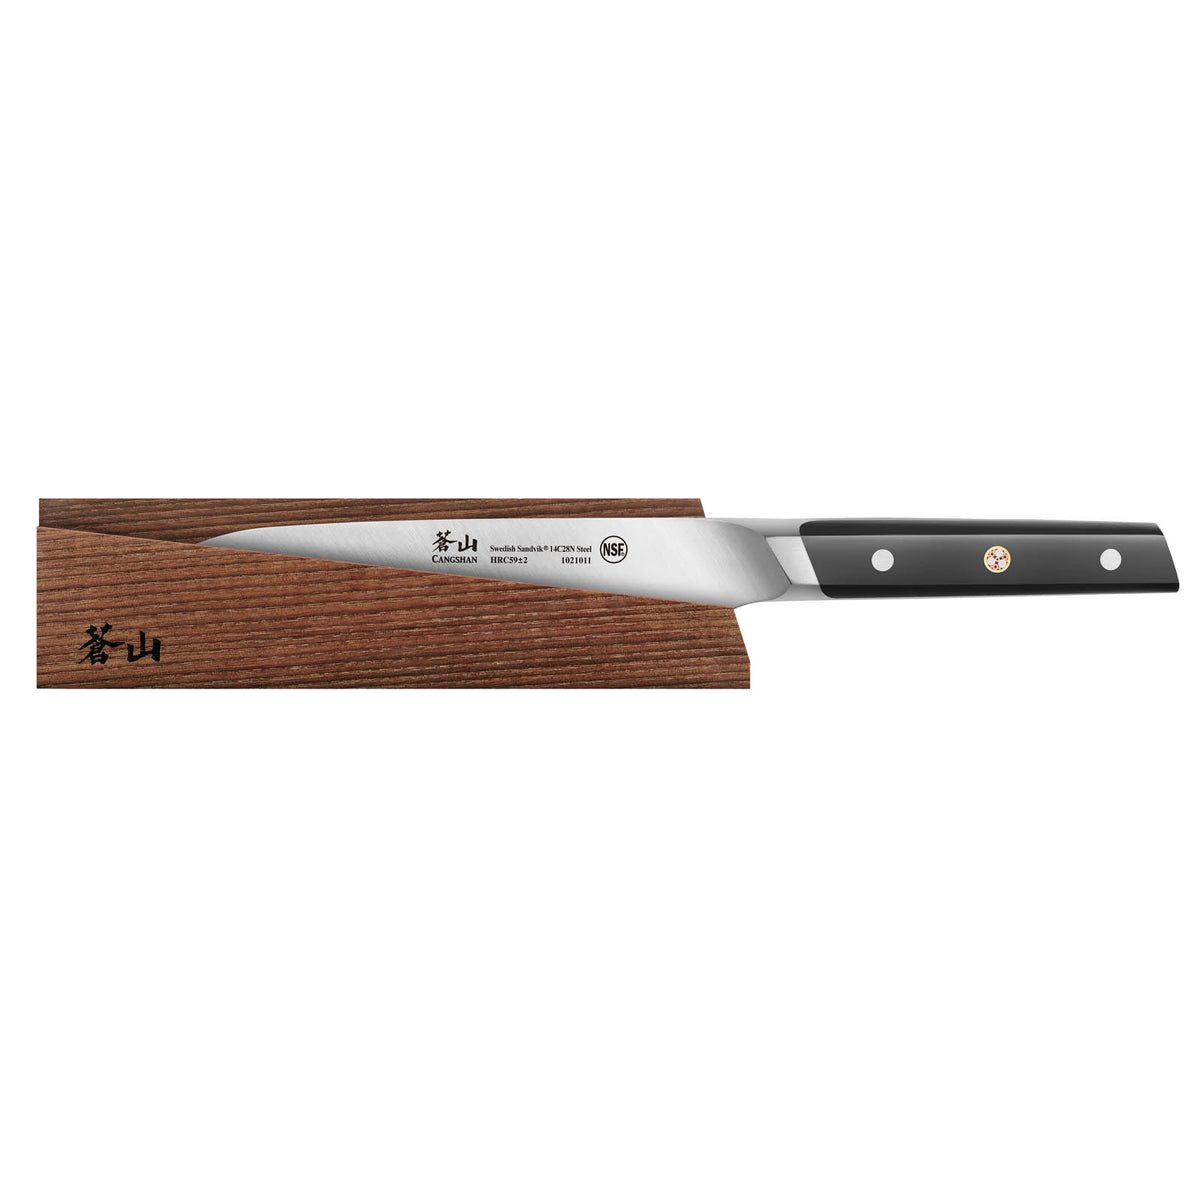 Cangshan NAKA Series X-7 Steel Forged Rocking Chef's Knife with Sheath  (10-Inch)